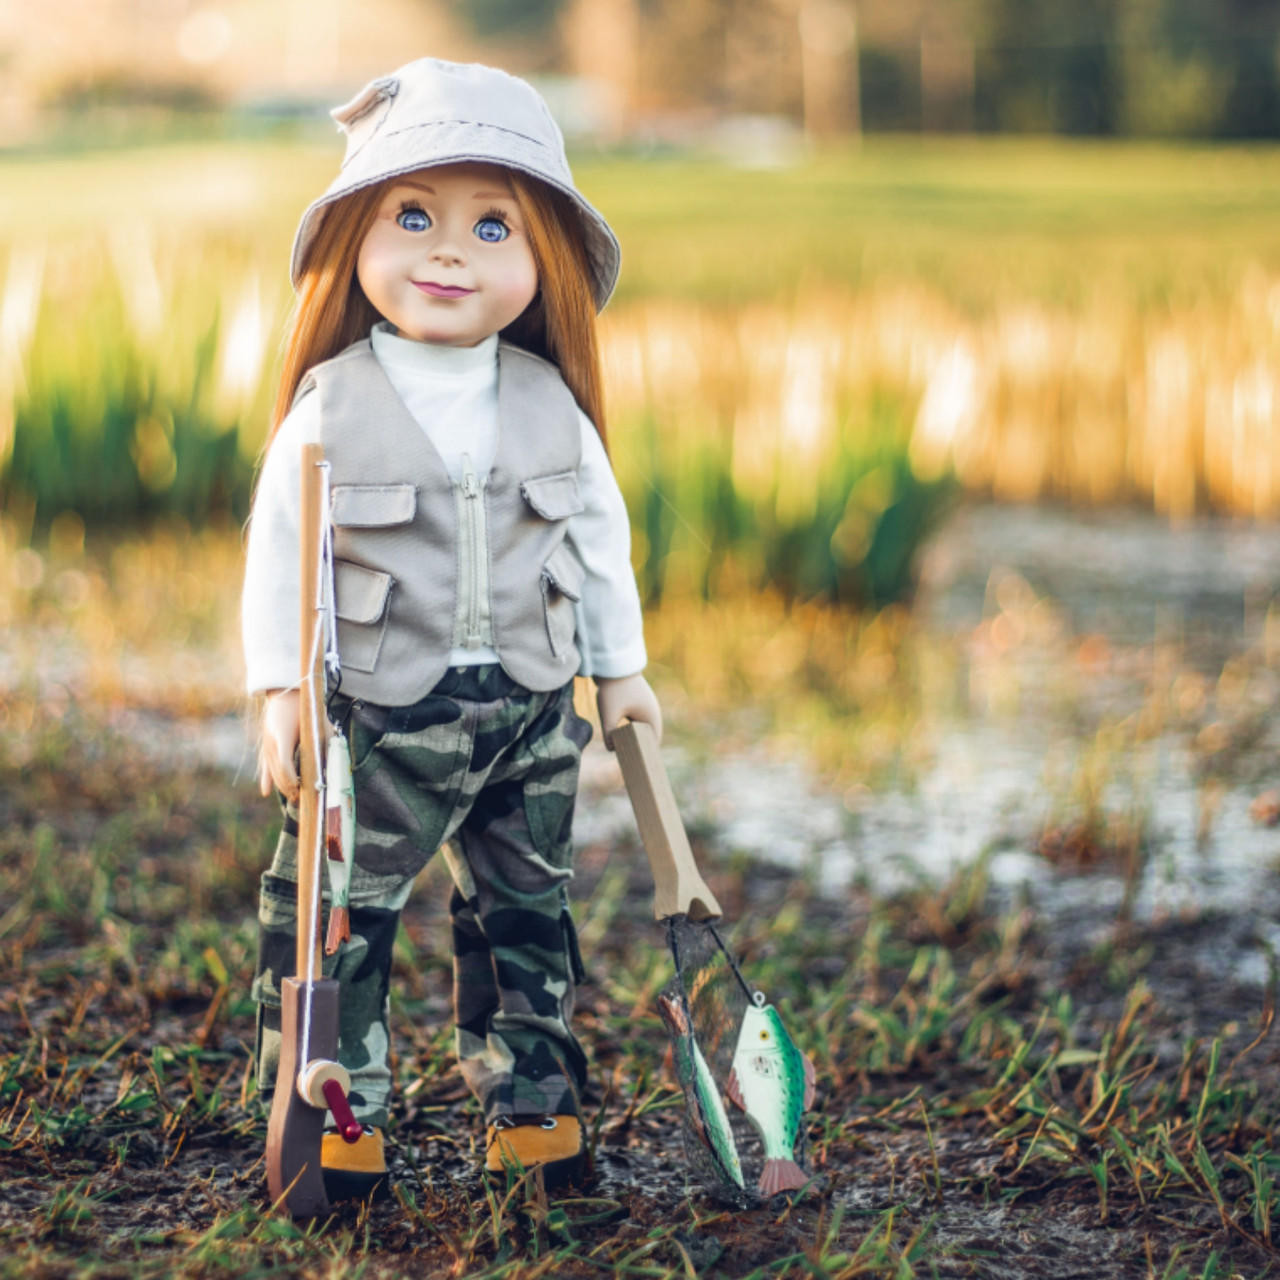 11-Piece Fishing Adventure Outfit,Accessories-18 Inch Doll